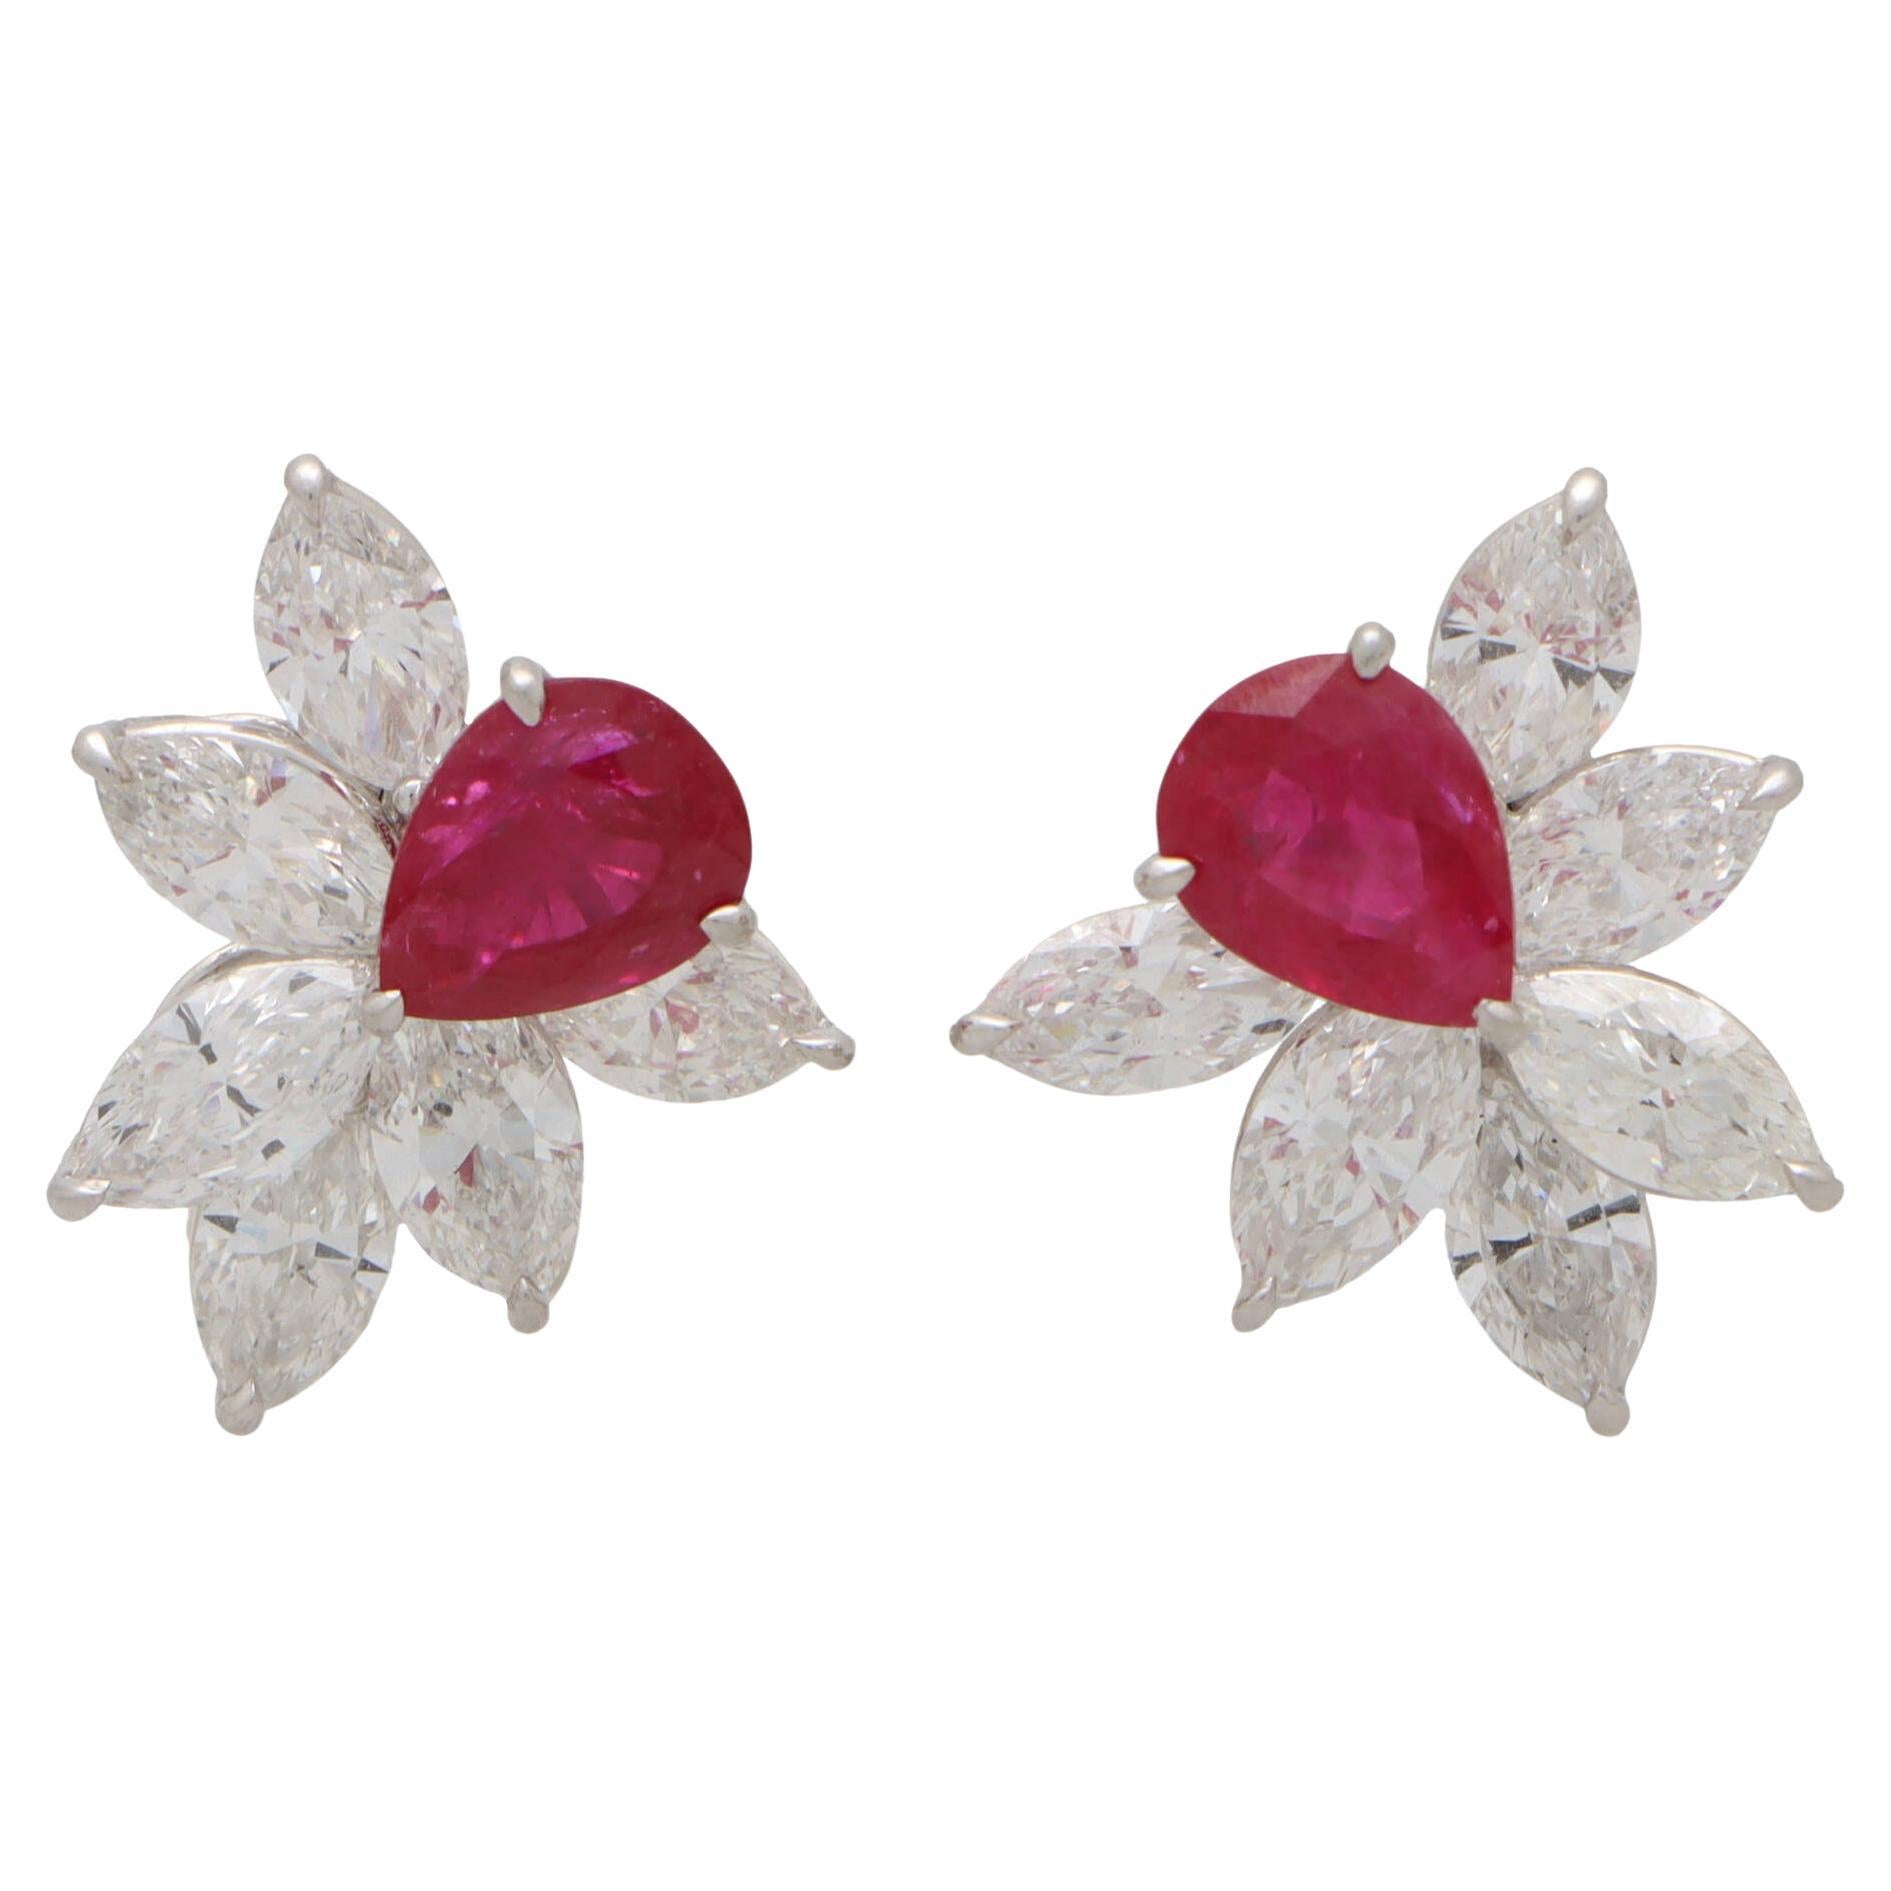 Contemporary Pear Cut Ruby and Diamond Cluster Earrings in Platinum